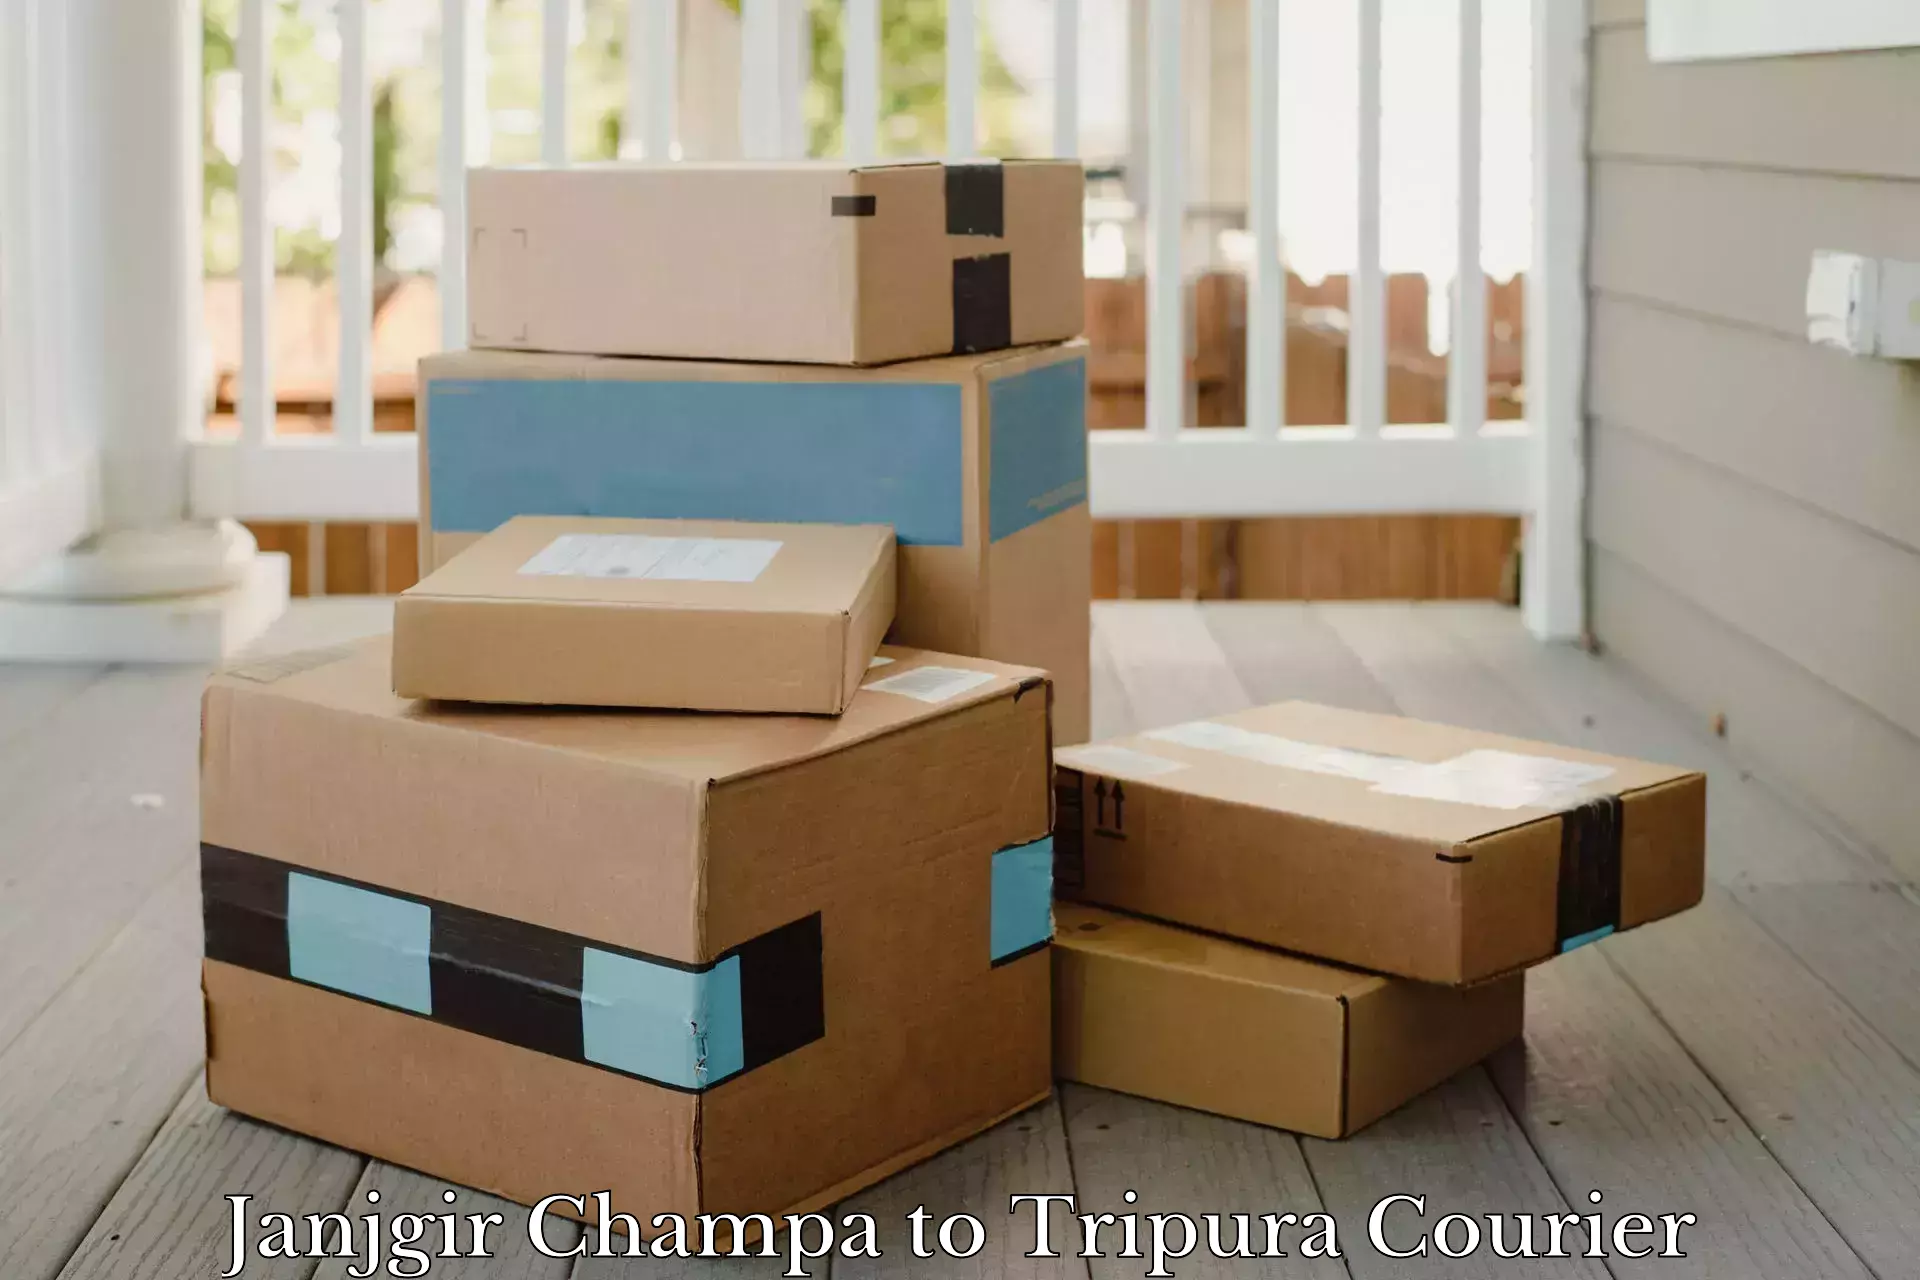 Reliable parcel services Janjgir Champa to Agartala